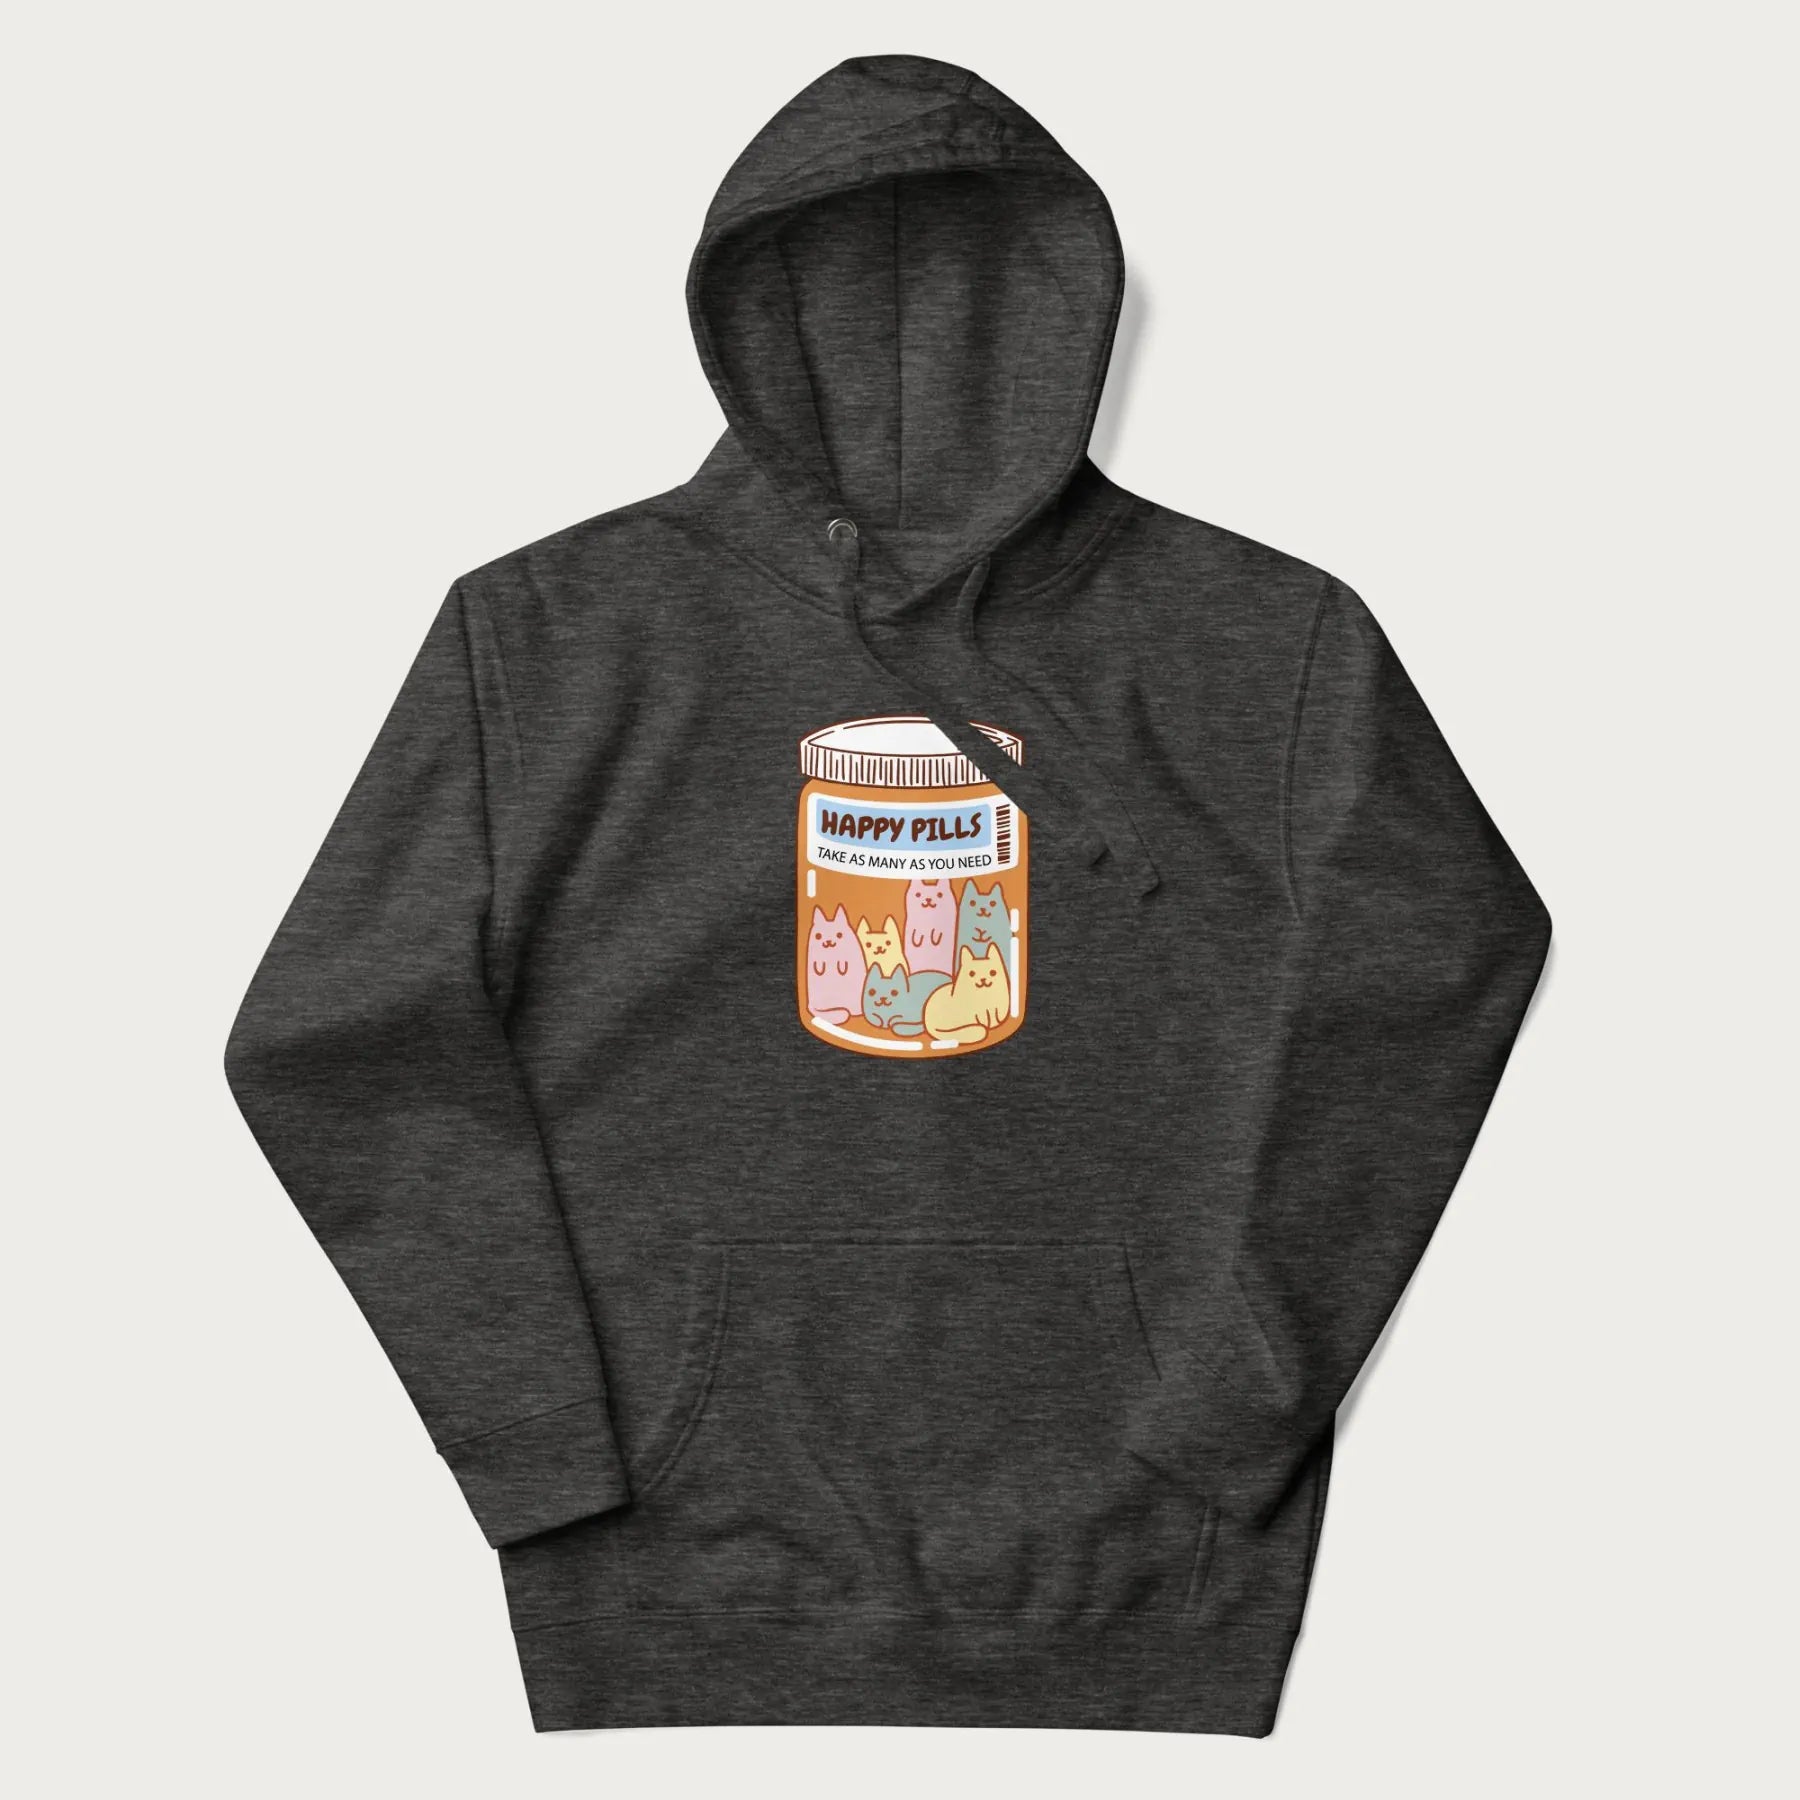 Cartoon cats in a pill bottle labeled 'Happy Pills' on a dark grey hoodie.